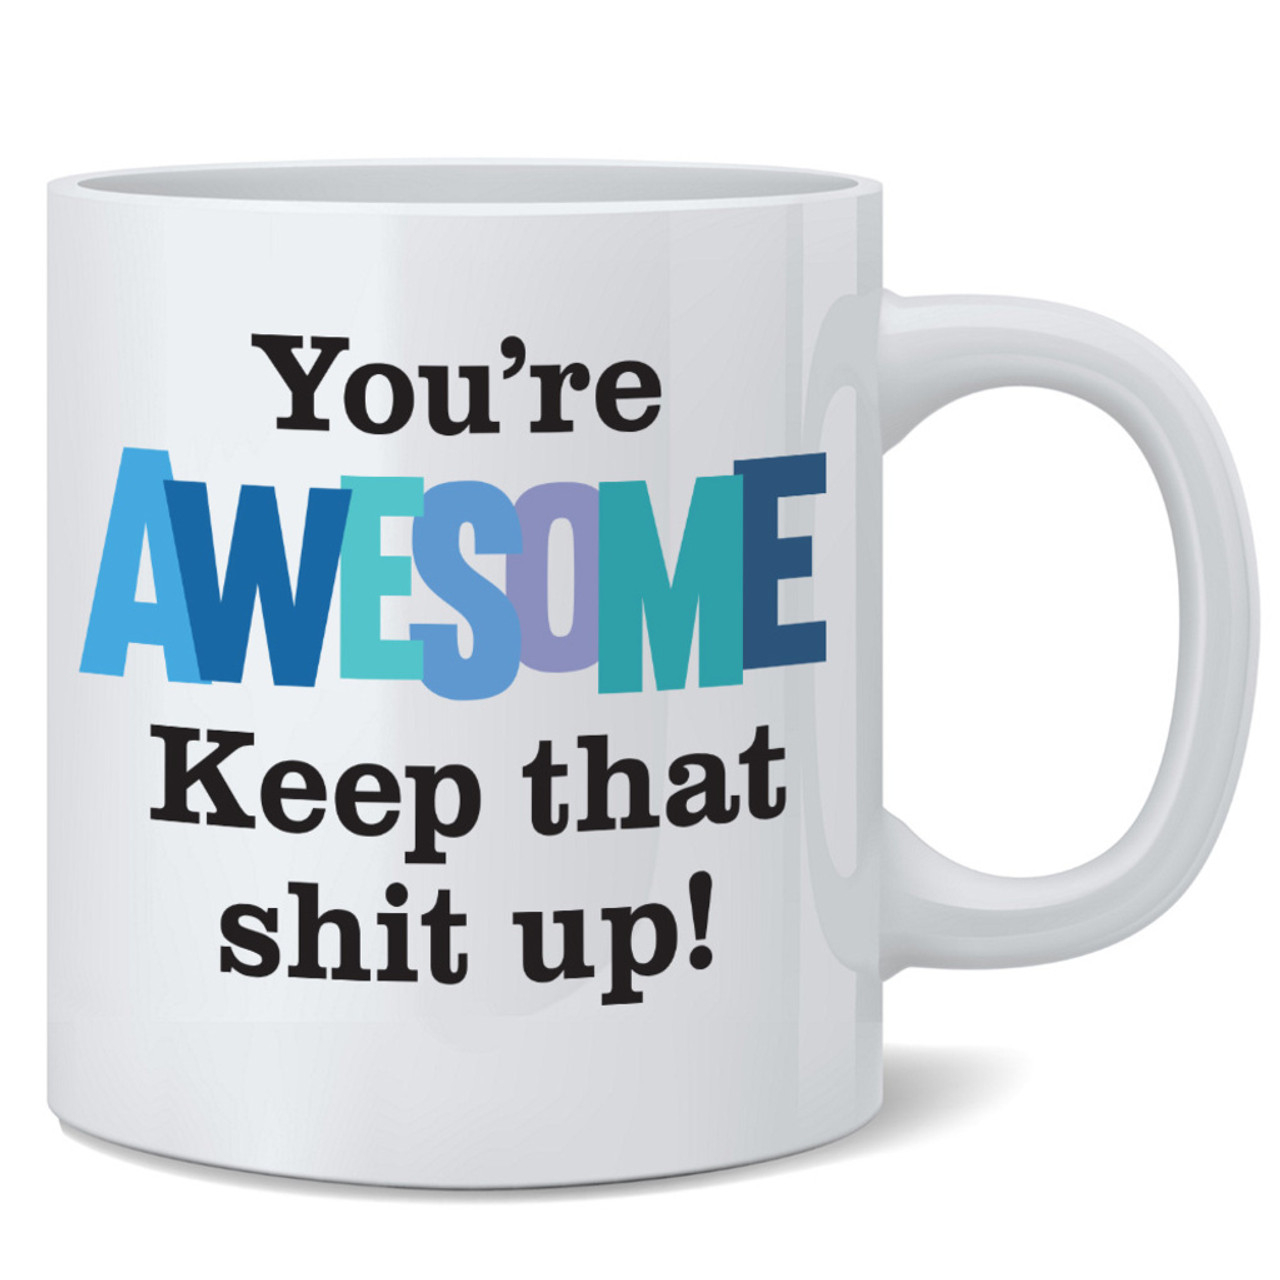 Funny Gifts/ Gift Ideas for friends /Funny Mugs/ Ceramic Mug/ Birthday Gift